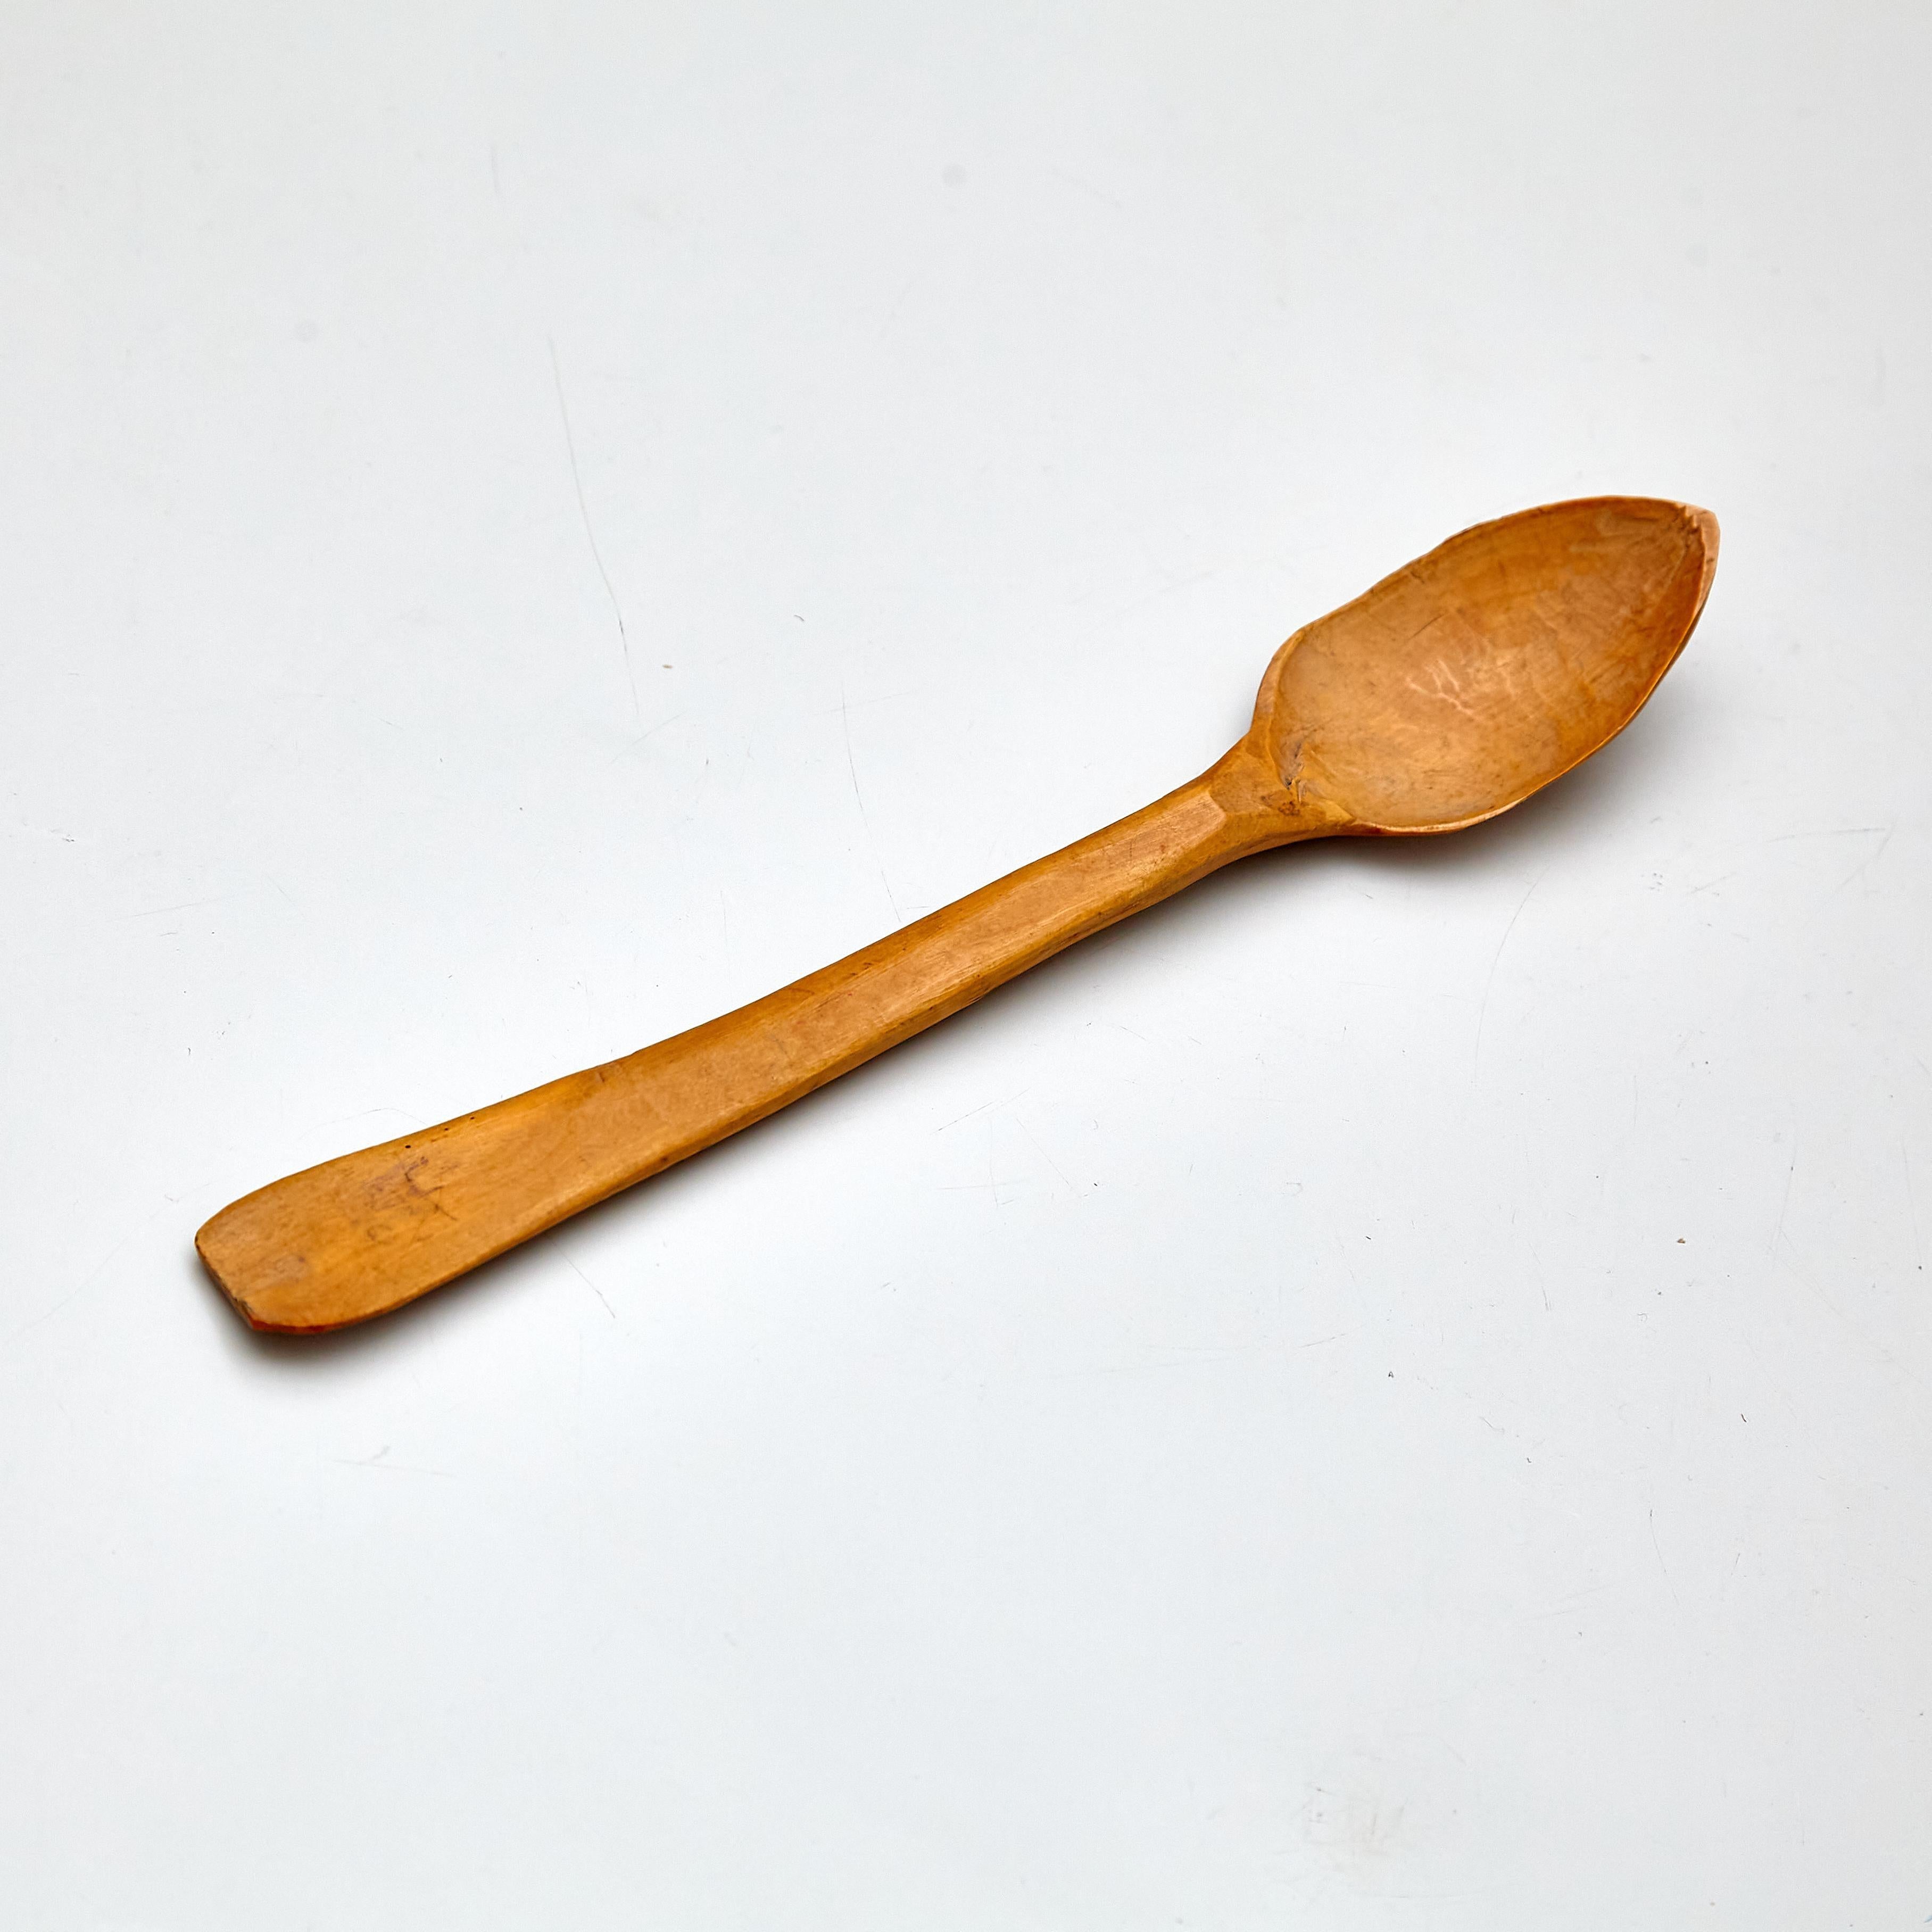 Rustic Primitive Pastor Handmade Wood Spoon

Manufactured in Spain, circa 1930.

In original condition with minor wear consistent of age and use, preserving a beautiful patina.

Materials: 
Wood 

Dimensions: 
D 2 cm x W 3.7 cm x H 22.3